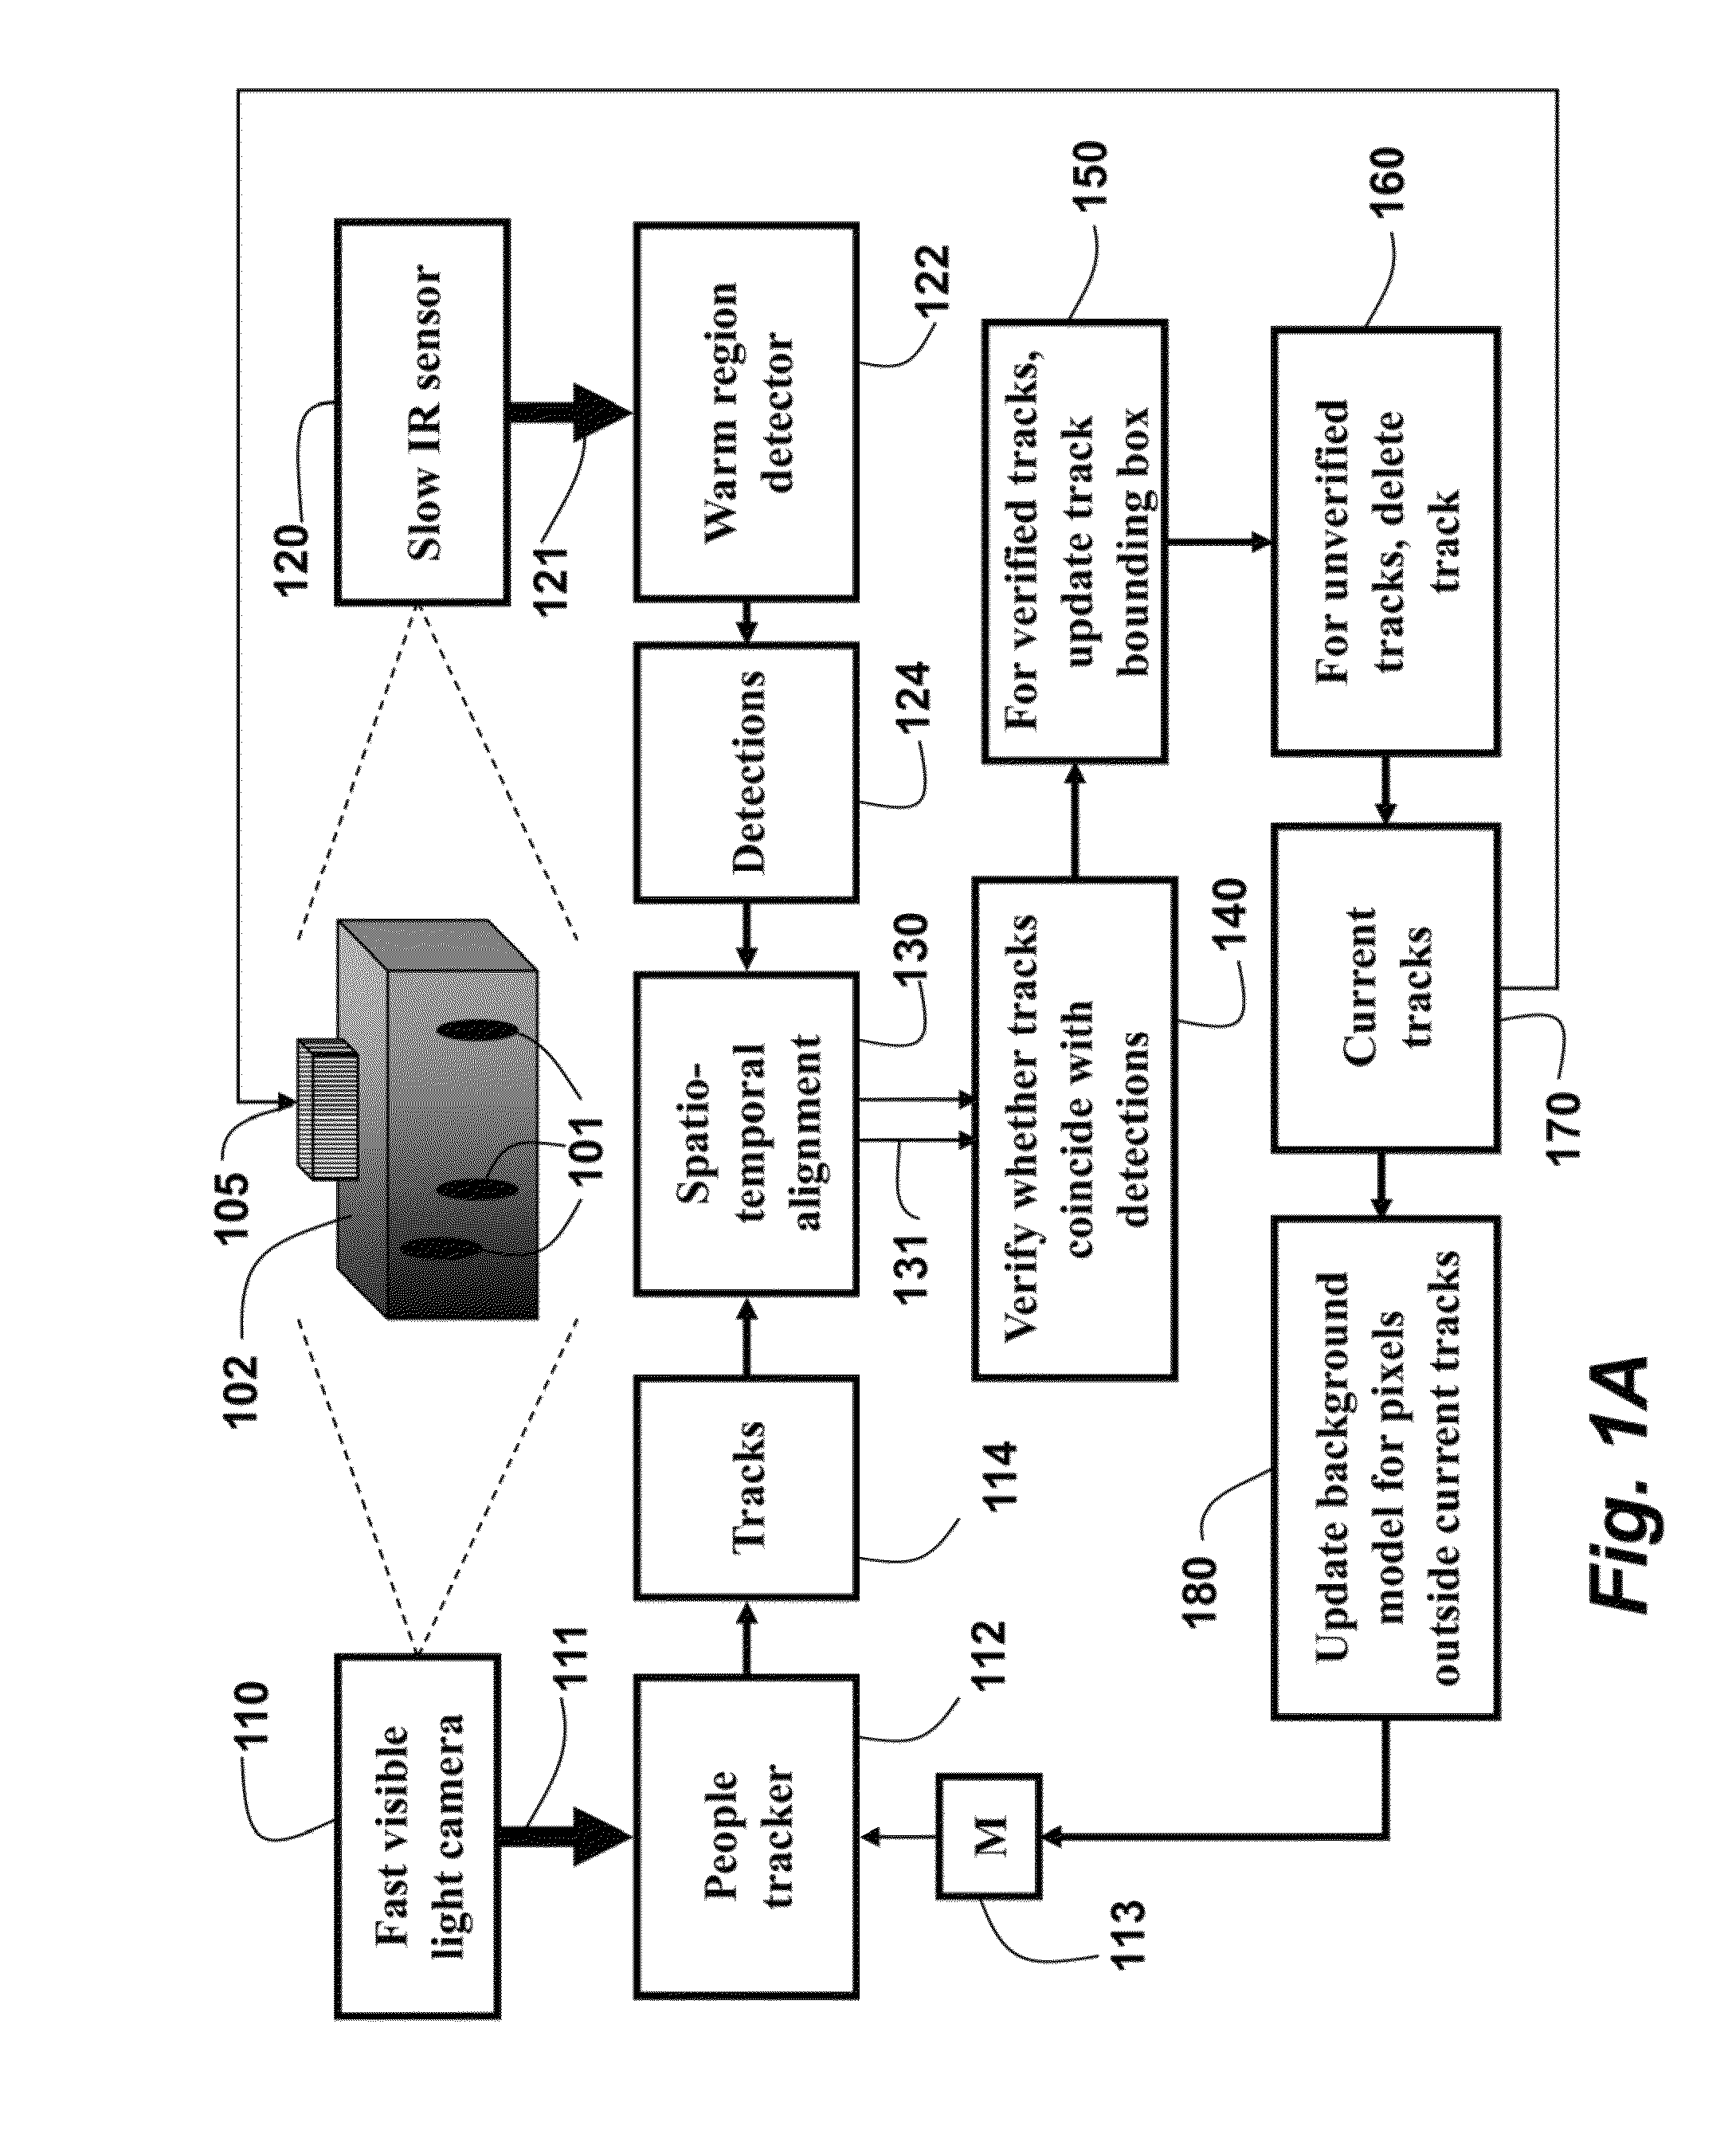 Method and system for tracking people in indoor environments using a visible light camera and a low-frame-rate infrared sensor